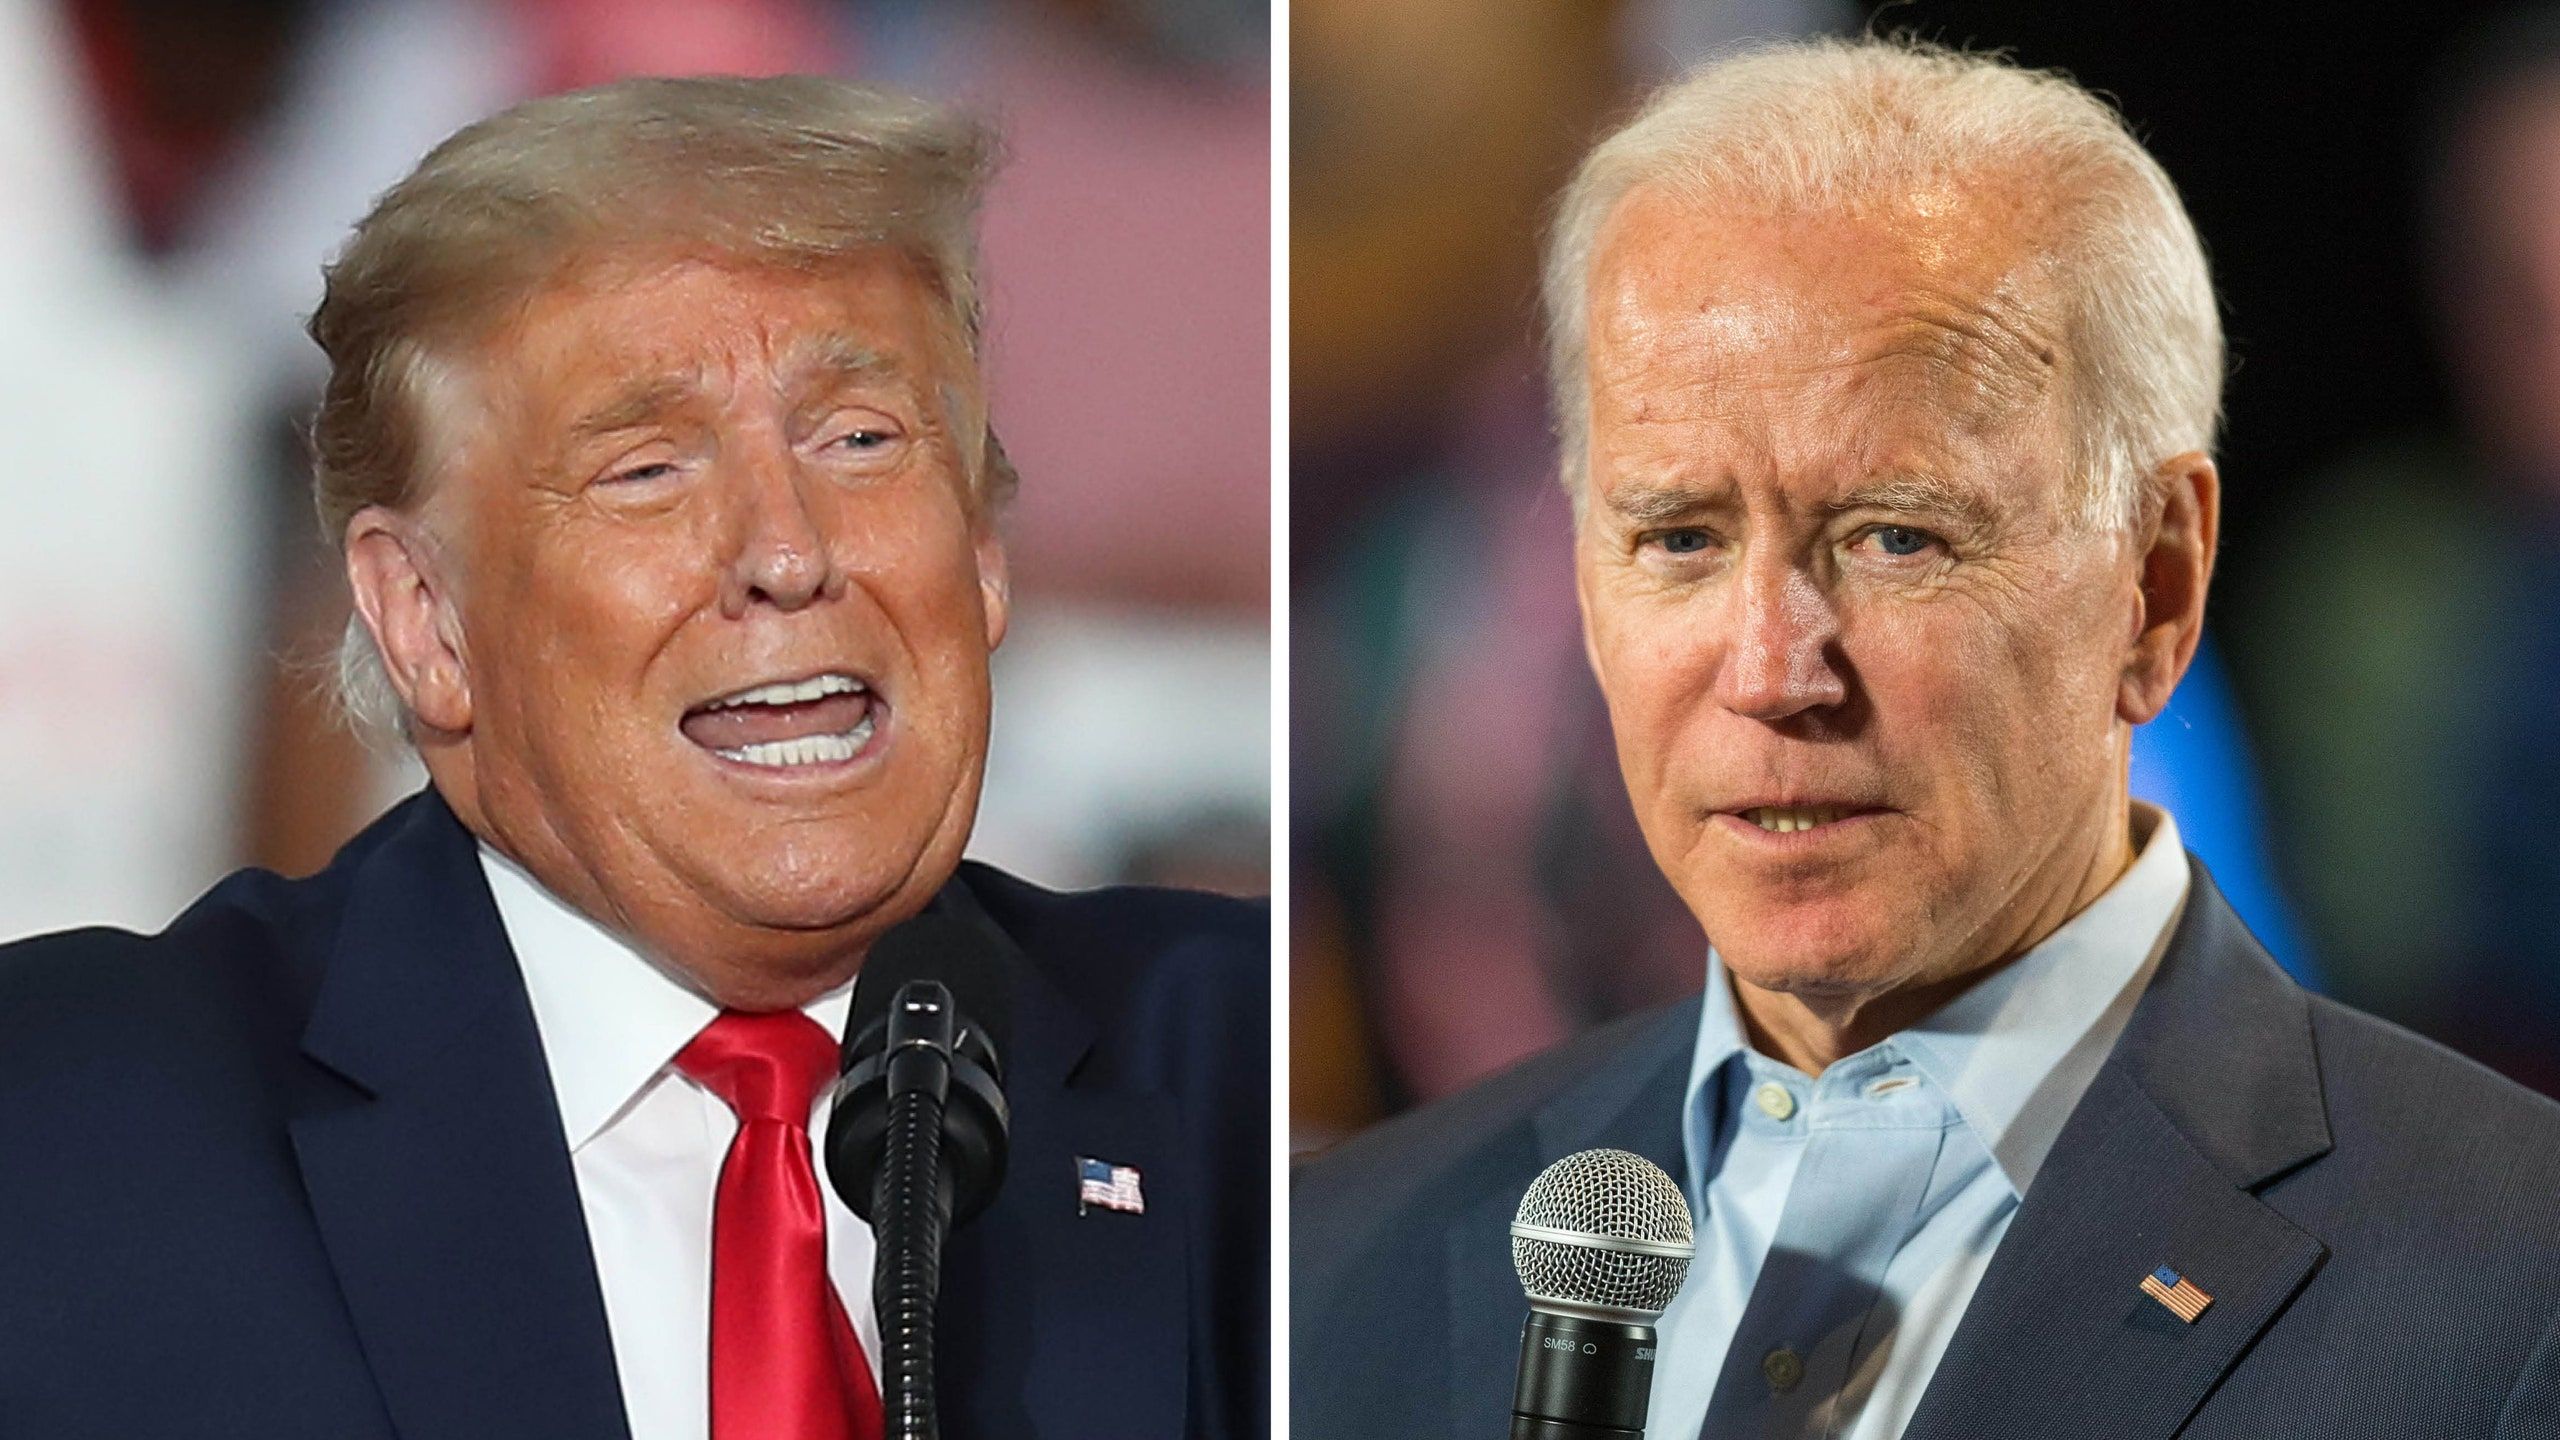 Next Presidential Debate Canceled, But Trump and Biden Will Have Dueling Town Halls